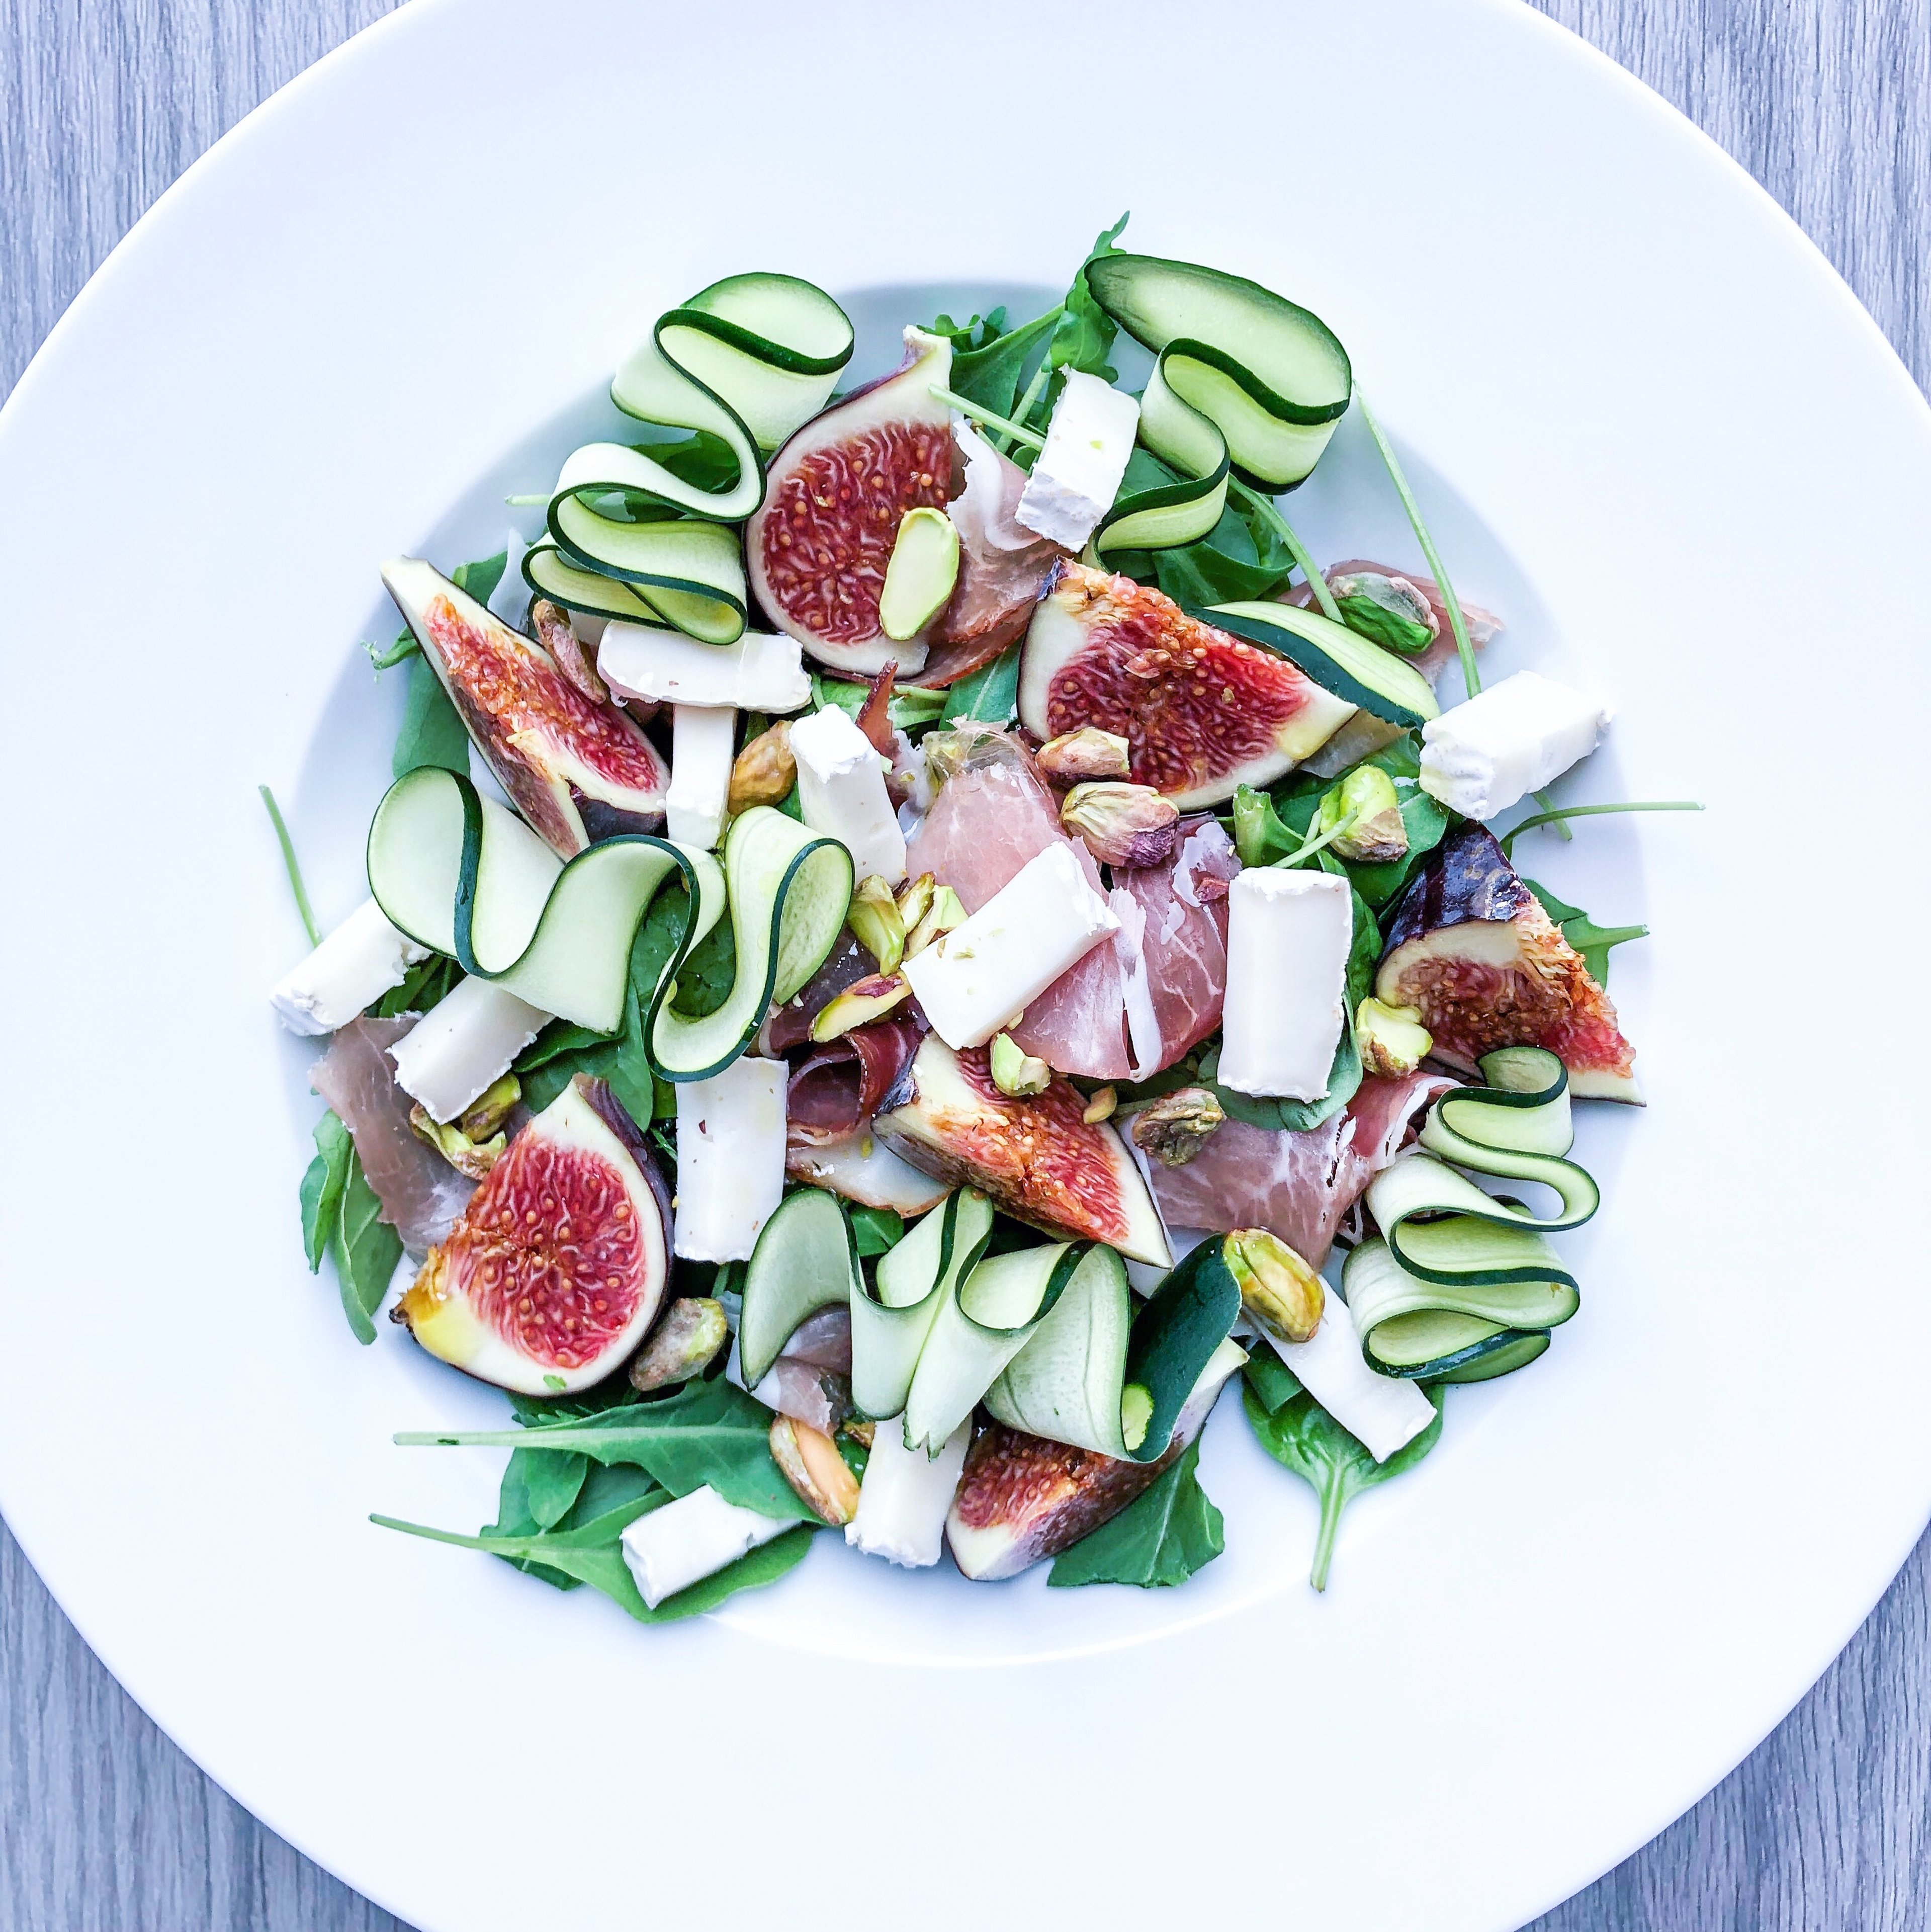 Wild Rocket Salad with Figs, Goats Cheese & Prosciutto